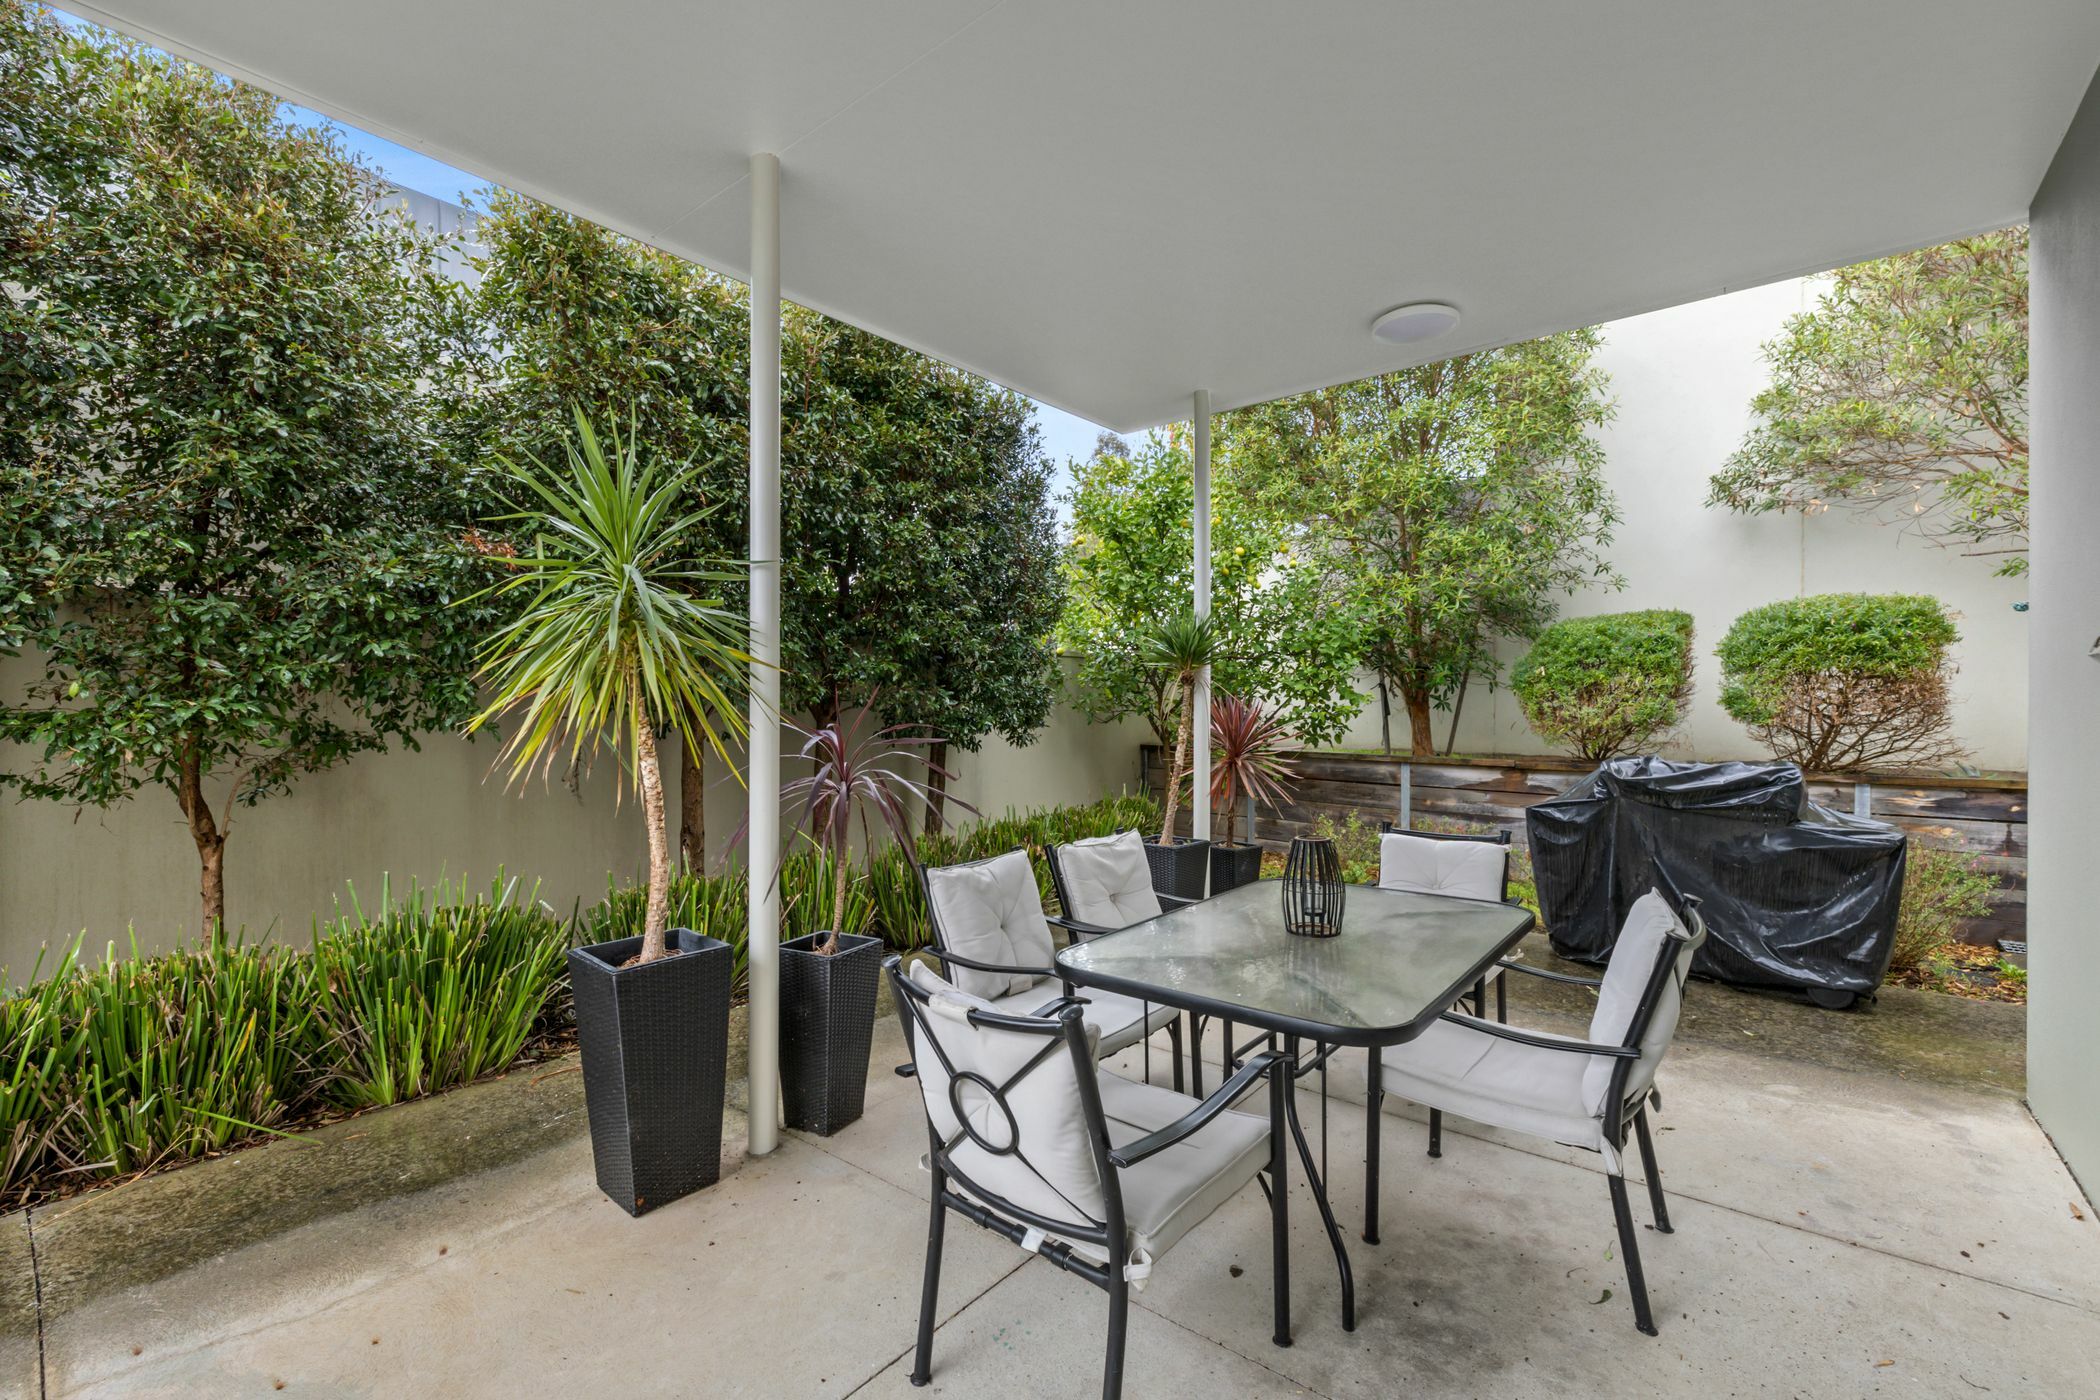 Contemporary outdoor living space with cushioned chairs and potted plants